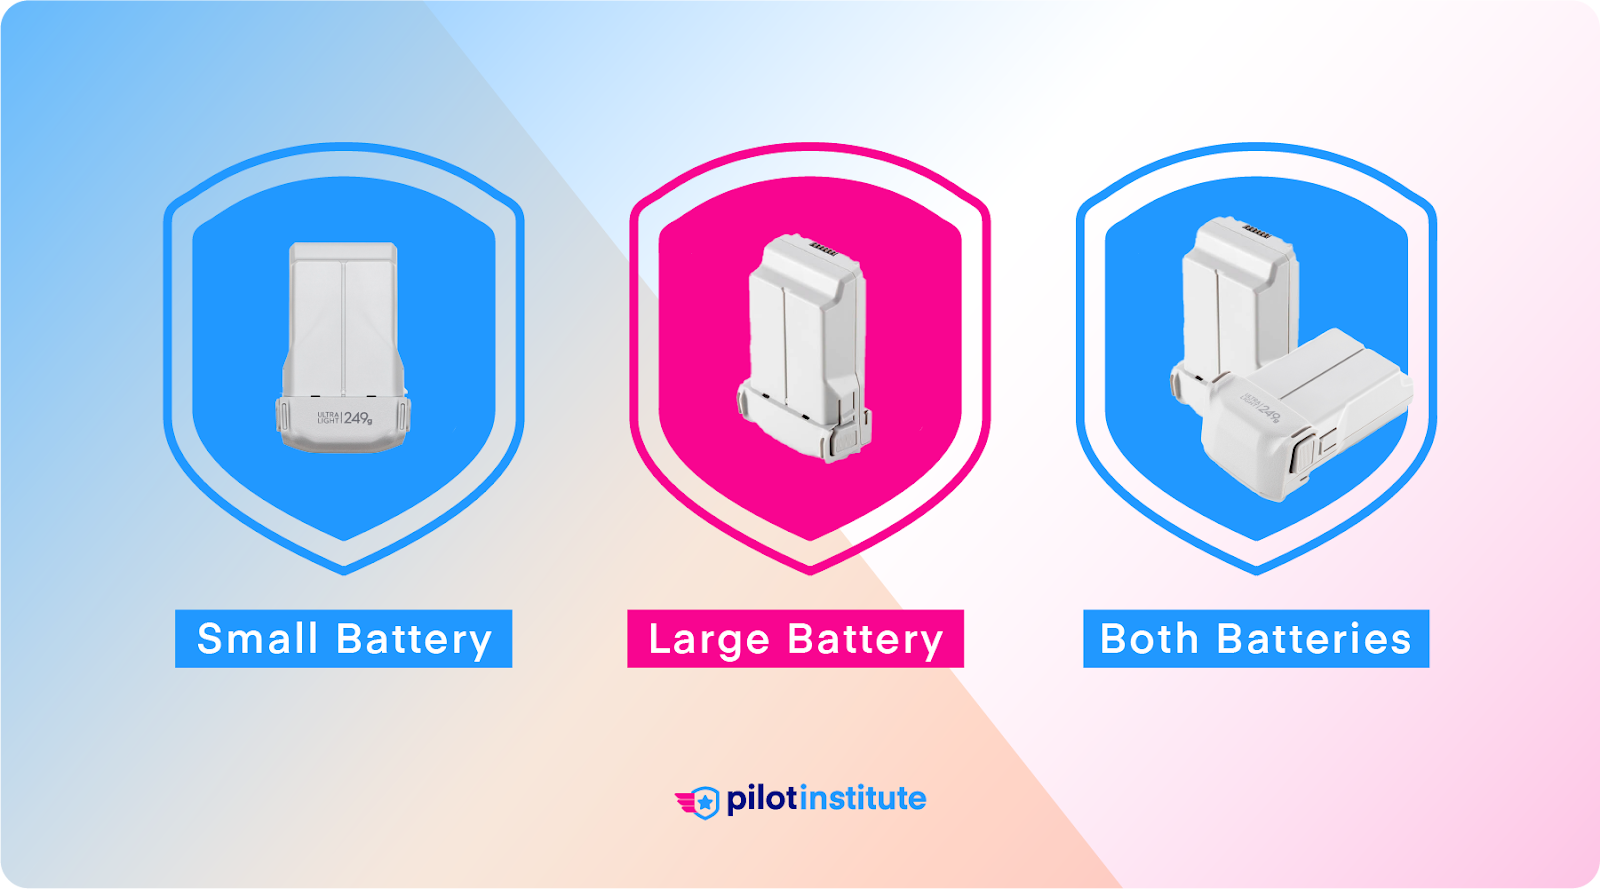 Small battery, large battery, and both batteries scenarios.